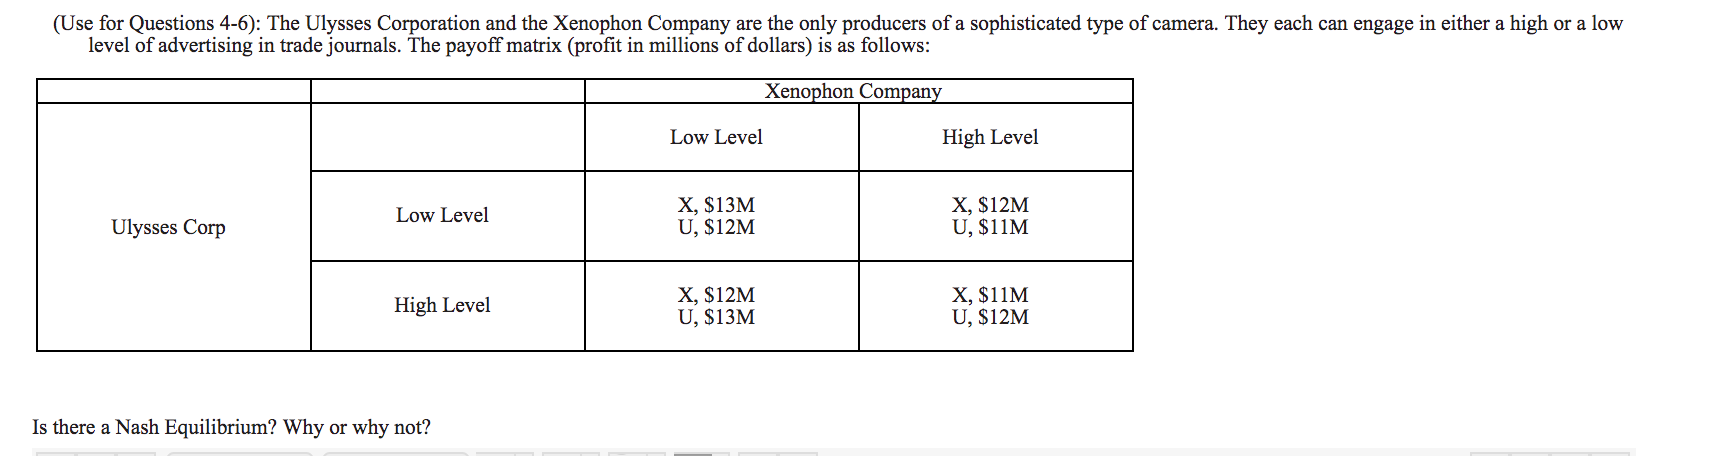 (Use for Questions 4-6): The Ulysses Corporation and the Xenophon Company
level of advertising in trade journals. The payoff matrix (profit in millions of dollars) is as follows:
are the only producers of a sophisticated type of camera. They each can engage in either a high
or a low
Xenophon Company
Low Level
High Level
Х, $13M
U, $12M
X, $12M
U, $11M
Low Level
Ulysses Corp
Х, S12M
U, $13M
X, $11M
U, $12M
High Level
Is there a Nash Equilibrium? Why or why not?
